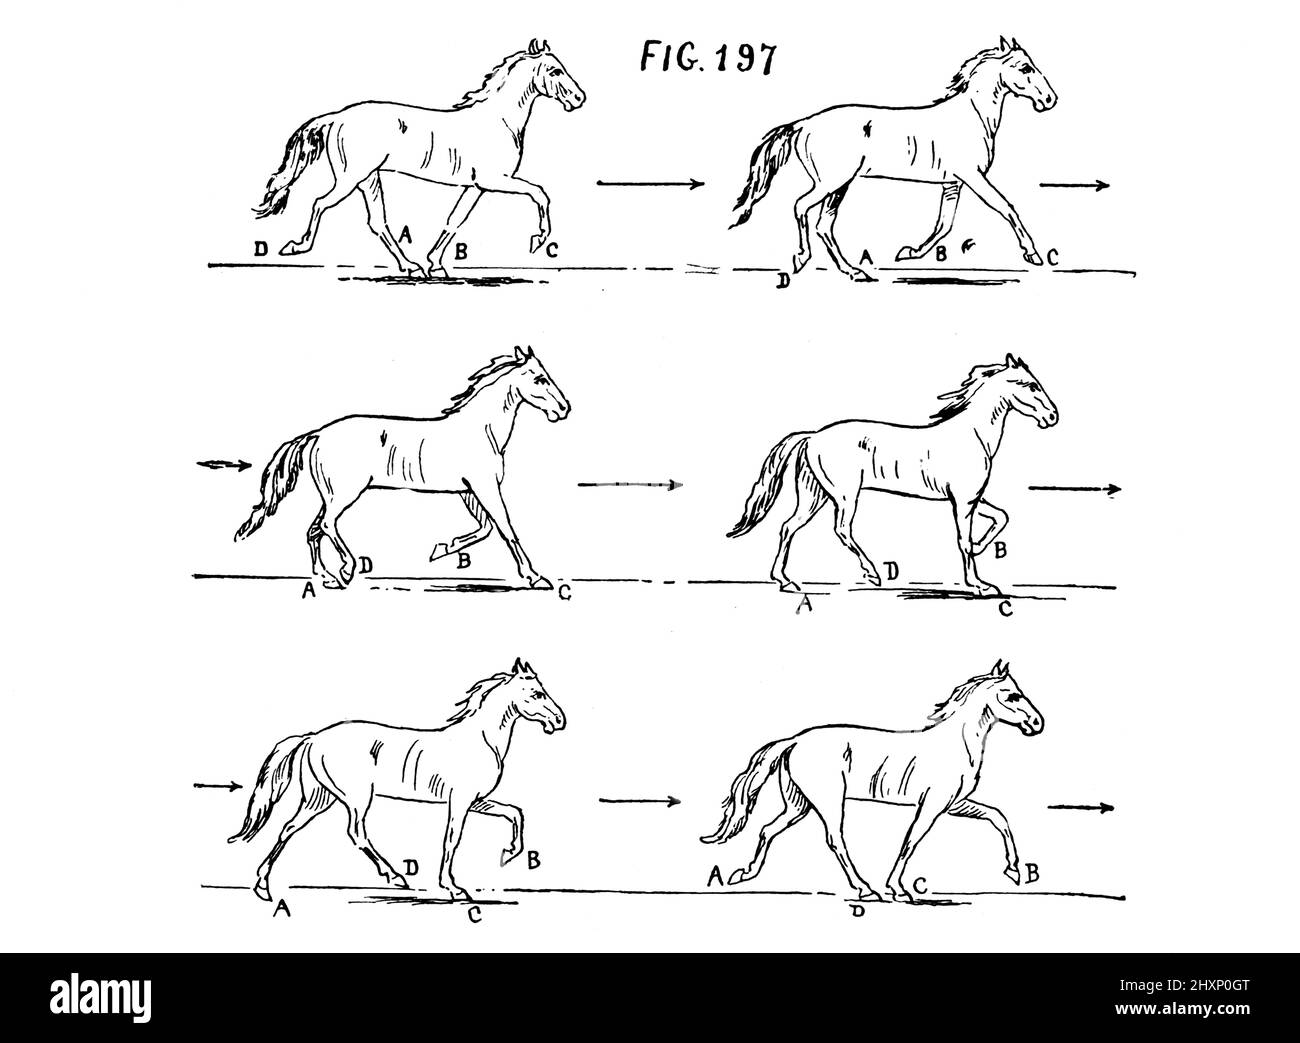 The Harmony in a Gait from the book The gait of the American trotter and pacer : an analysis of their gait by a new method and an investigation of the general principles concerning the proper balancing of motion action and extension by Rudolf Jordan Published New York : W. R. Jenkins Co. 1910 Stock Photo